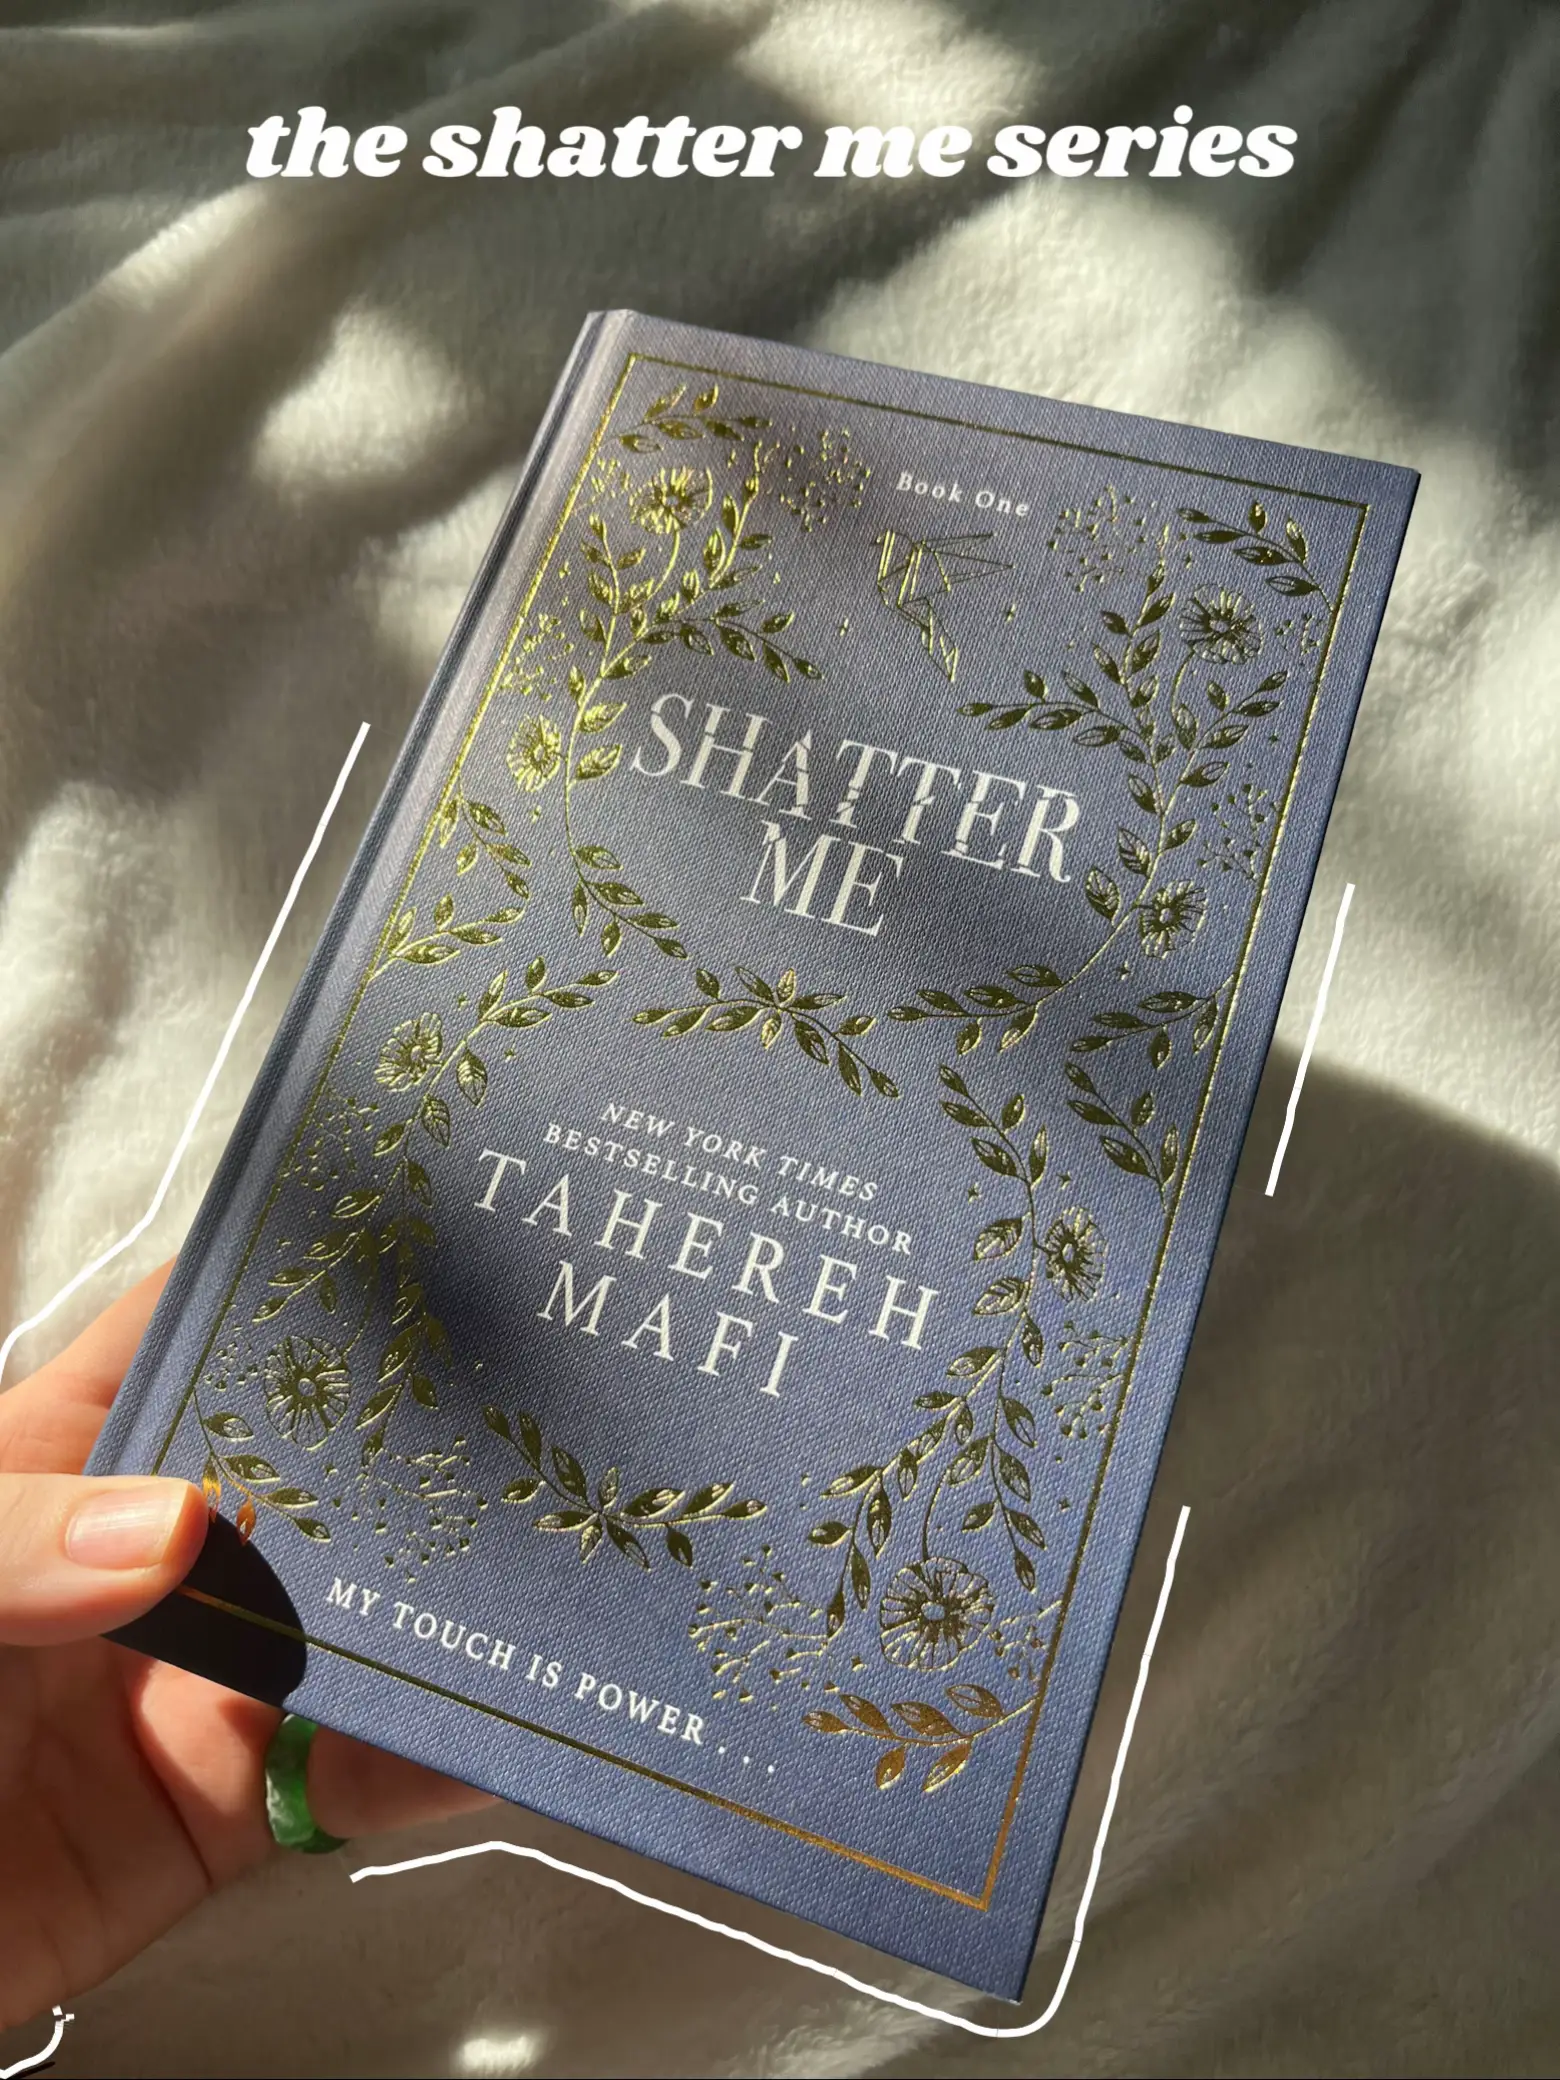 Short Book Review: Shatter Me (Shatter Me #1) by Tahereh Mafi – The Talking  Bookworm